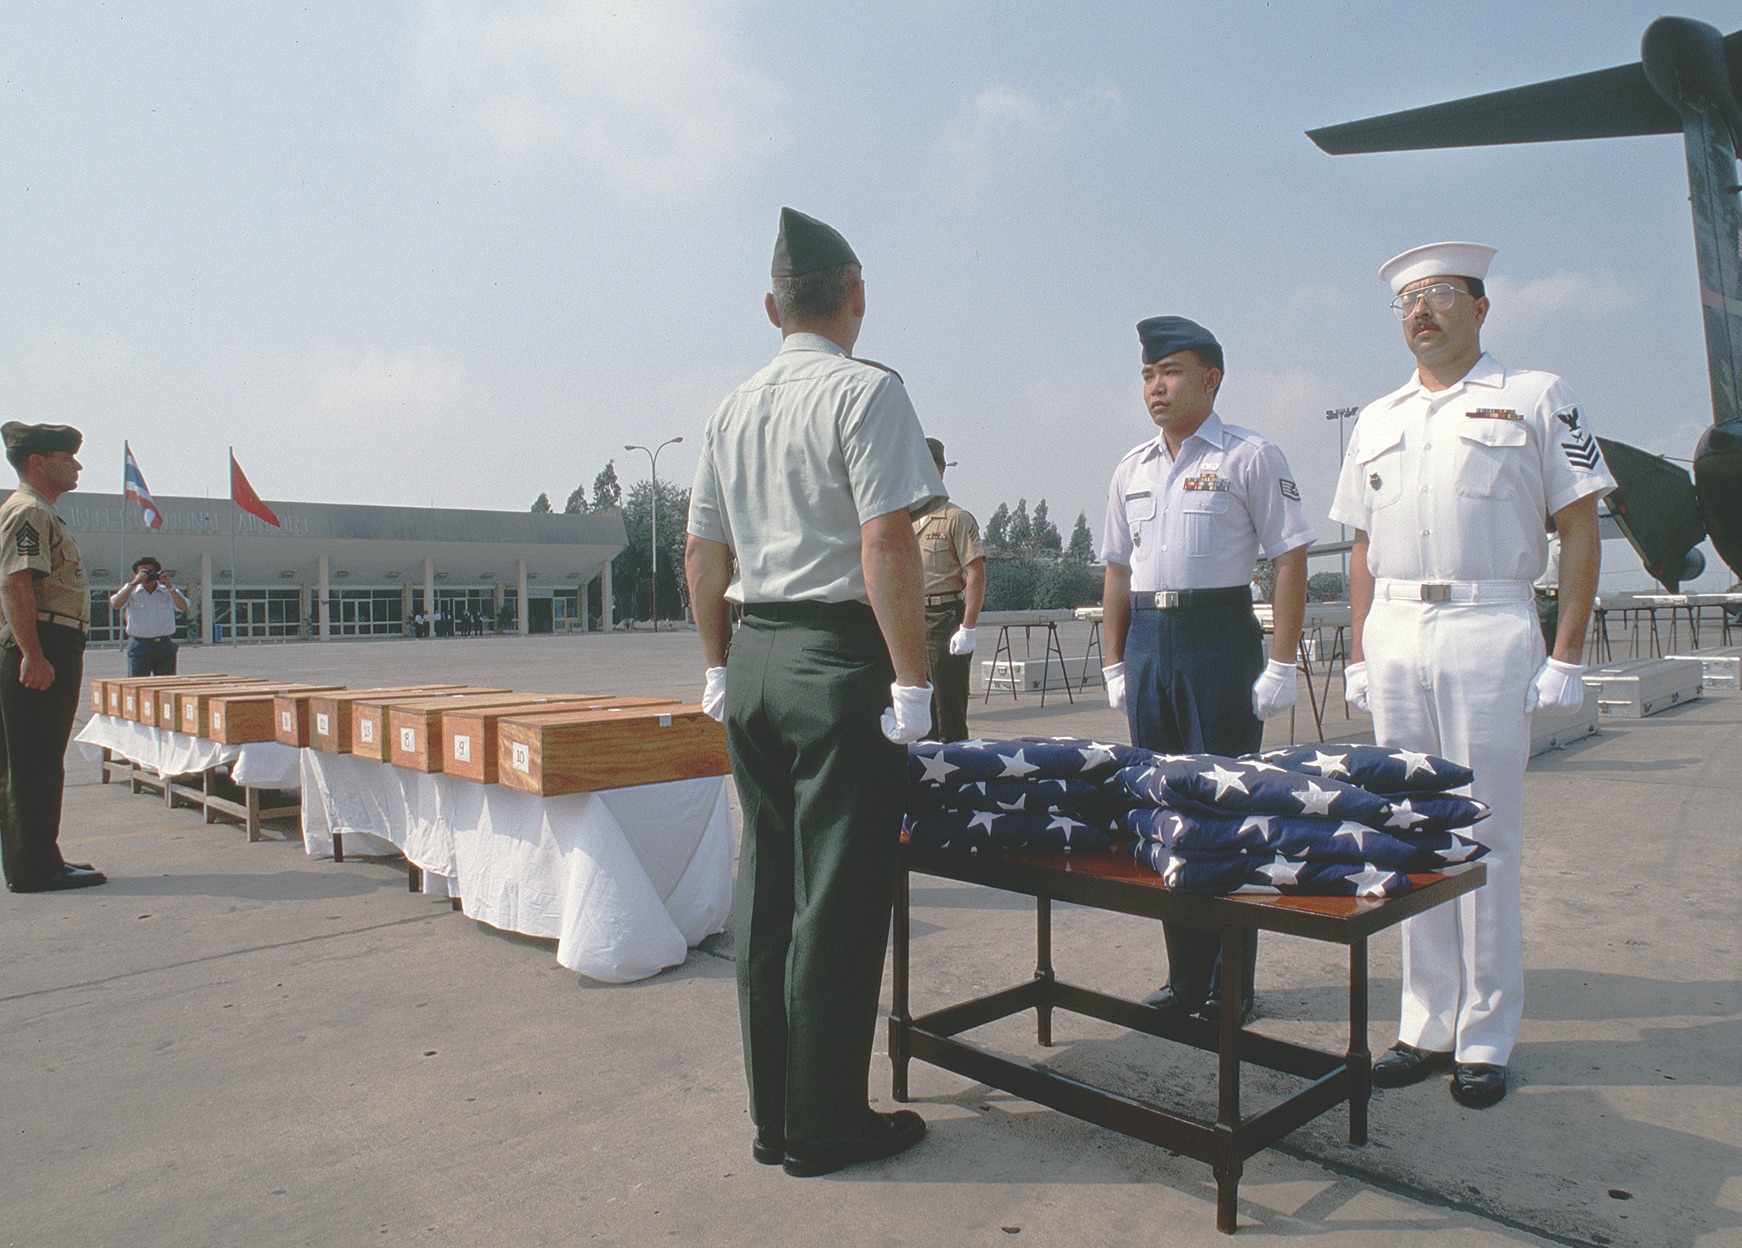 The remains of Americans killed in Vietnam are honored before being loaded onto a C-141 in Hanoi in February 1994. / Getty Images